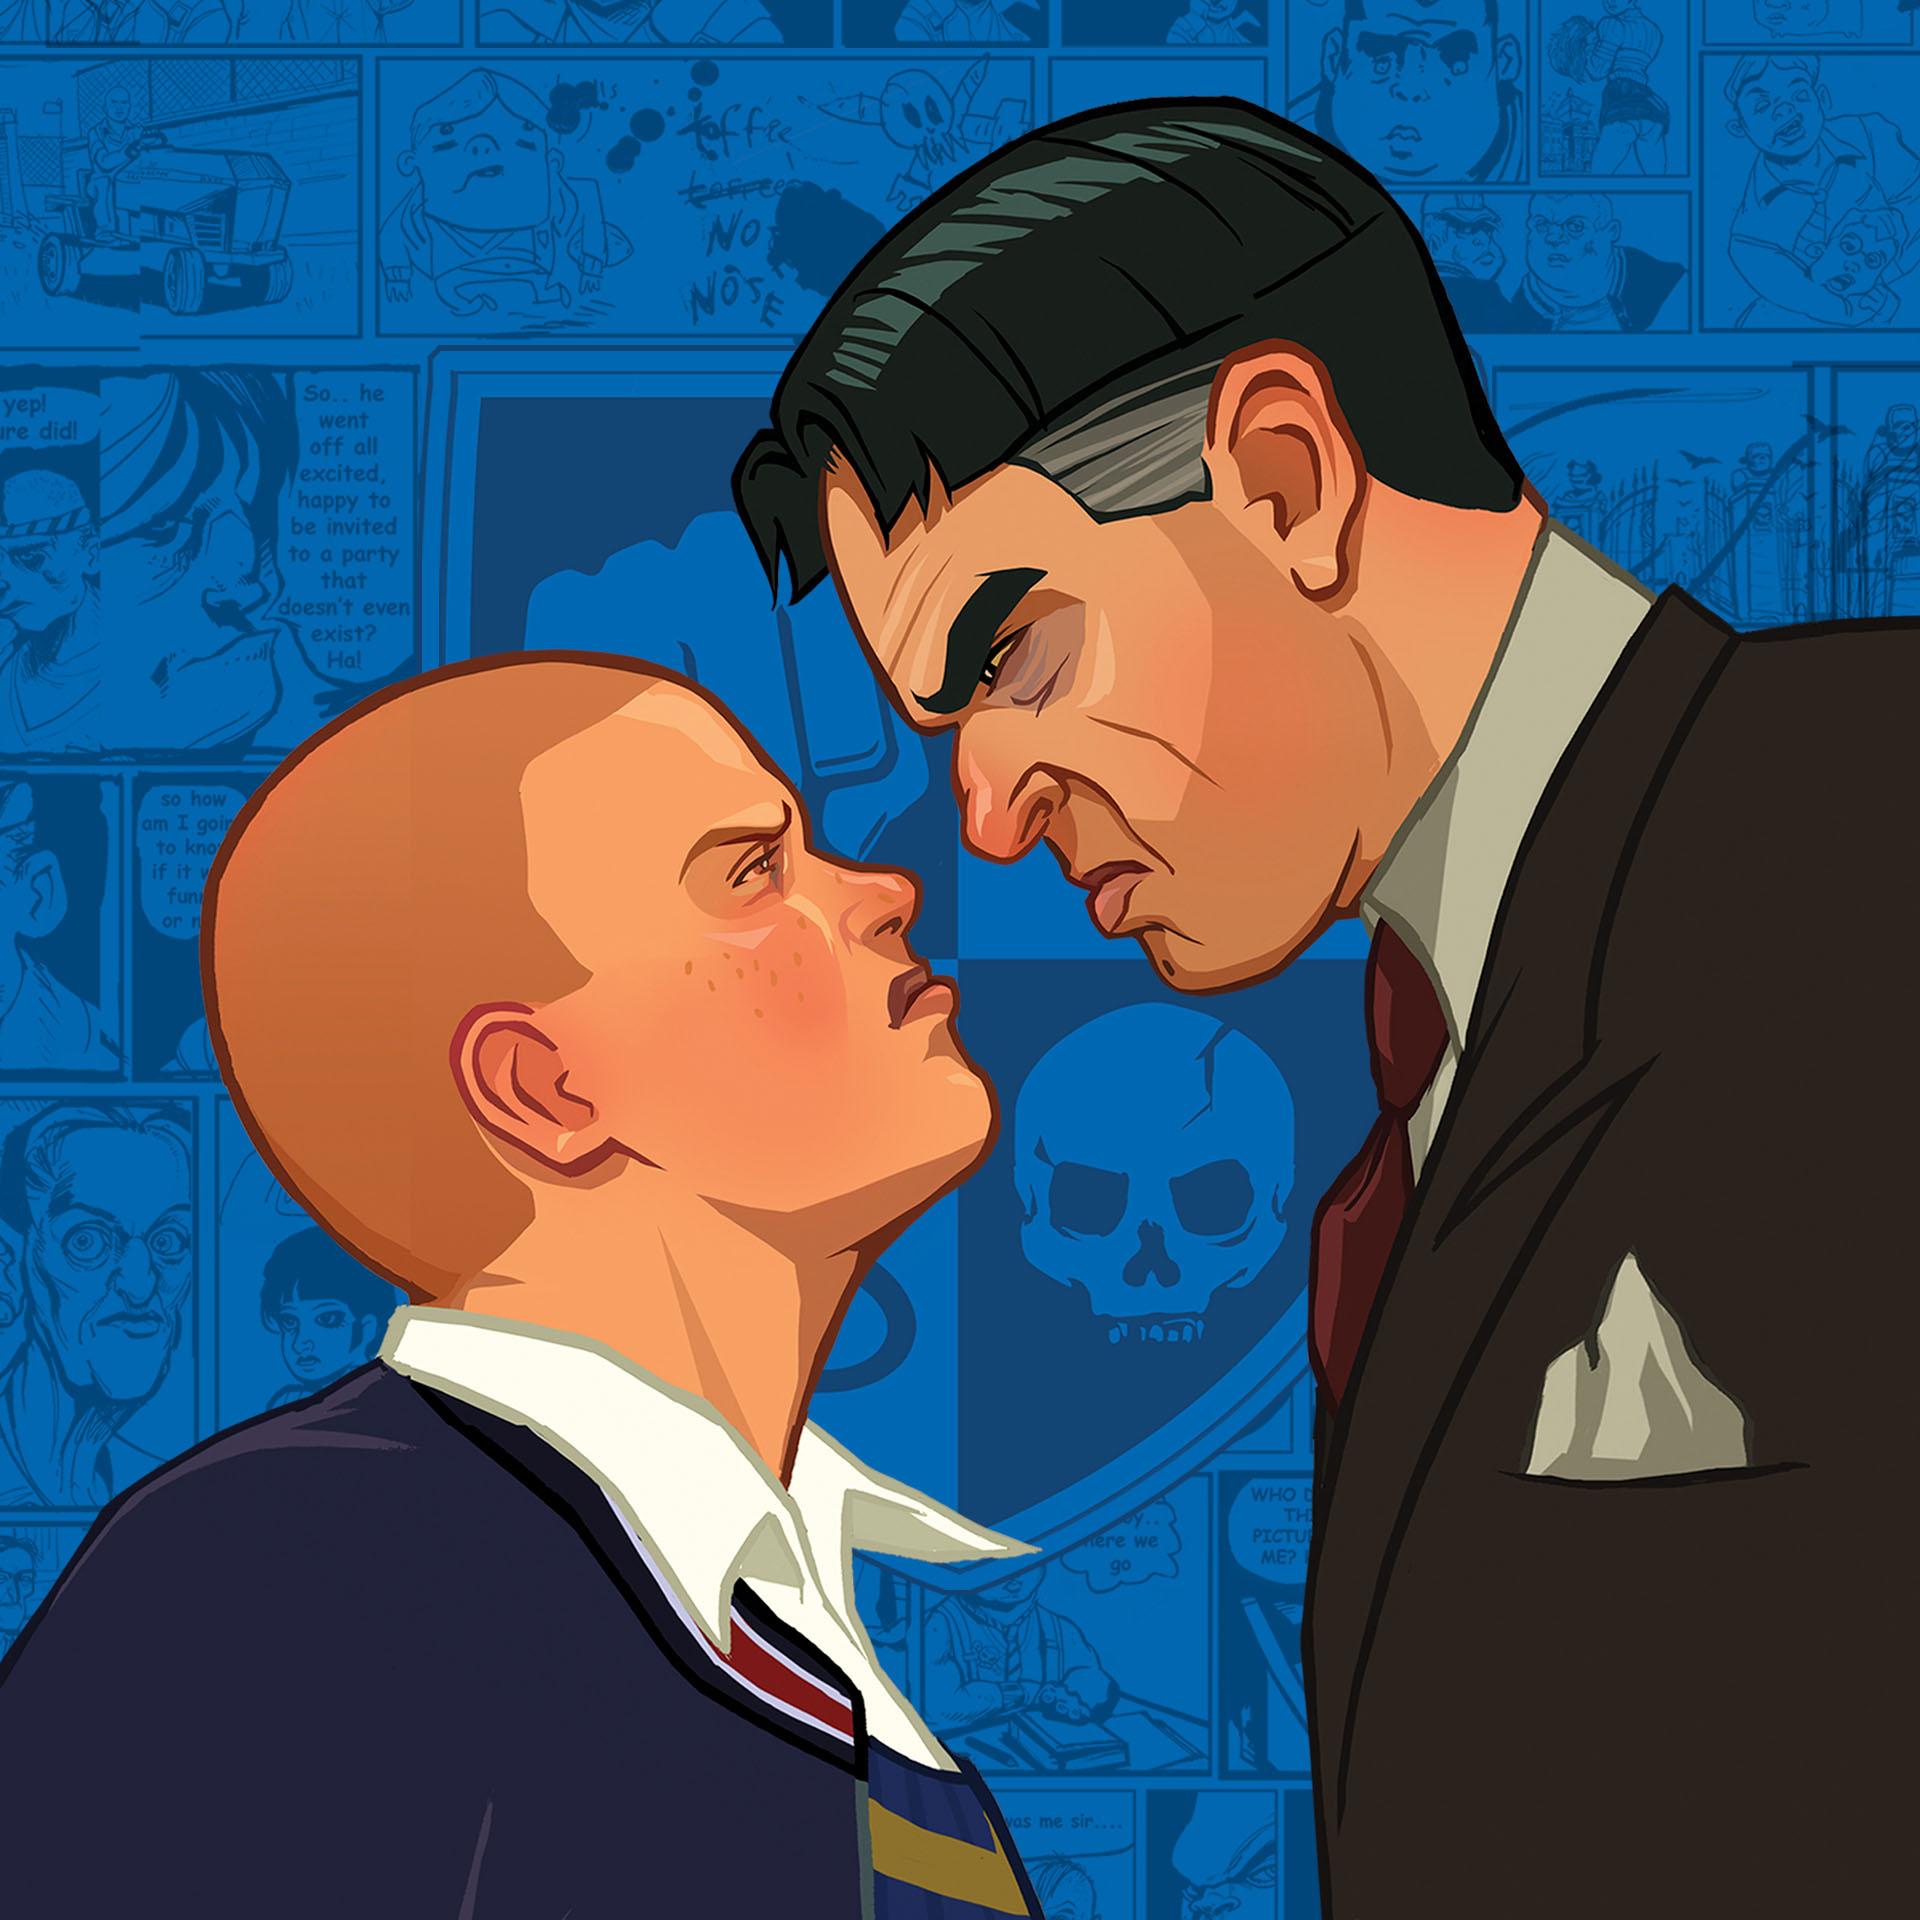 Download HD graphics for Bully: Scholarship Edition